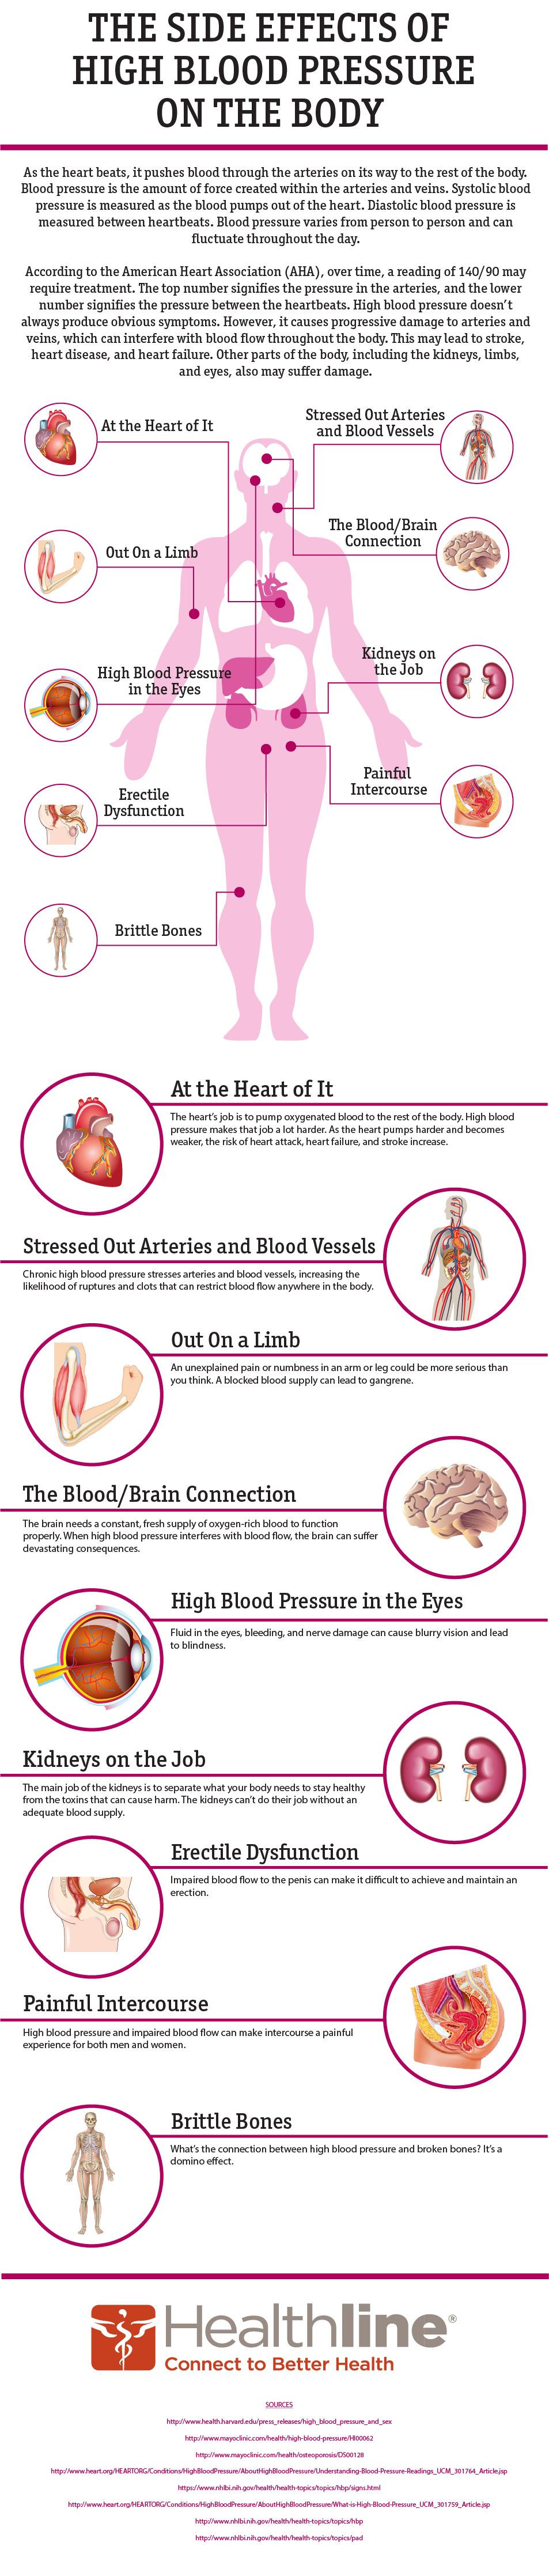 negative-effects-of-high-blood-pressure